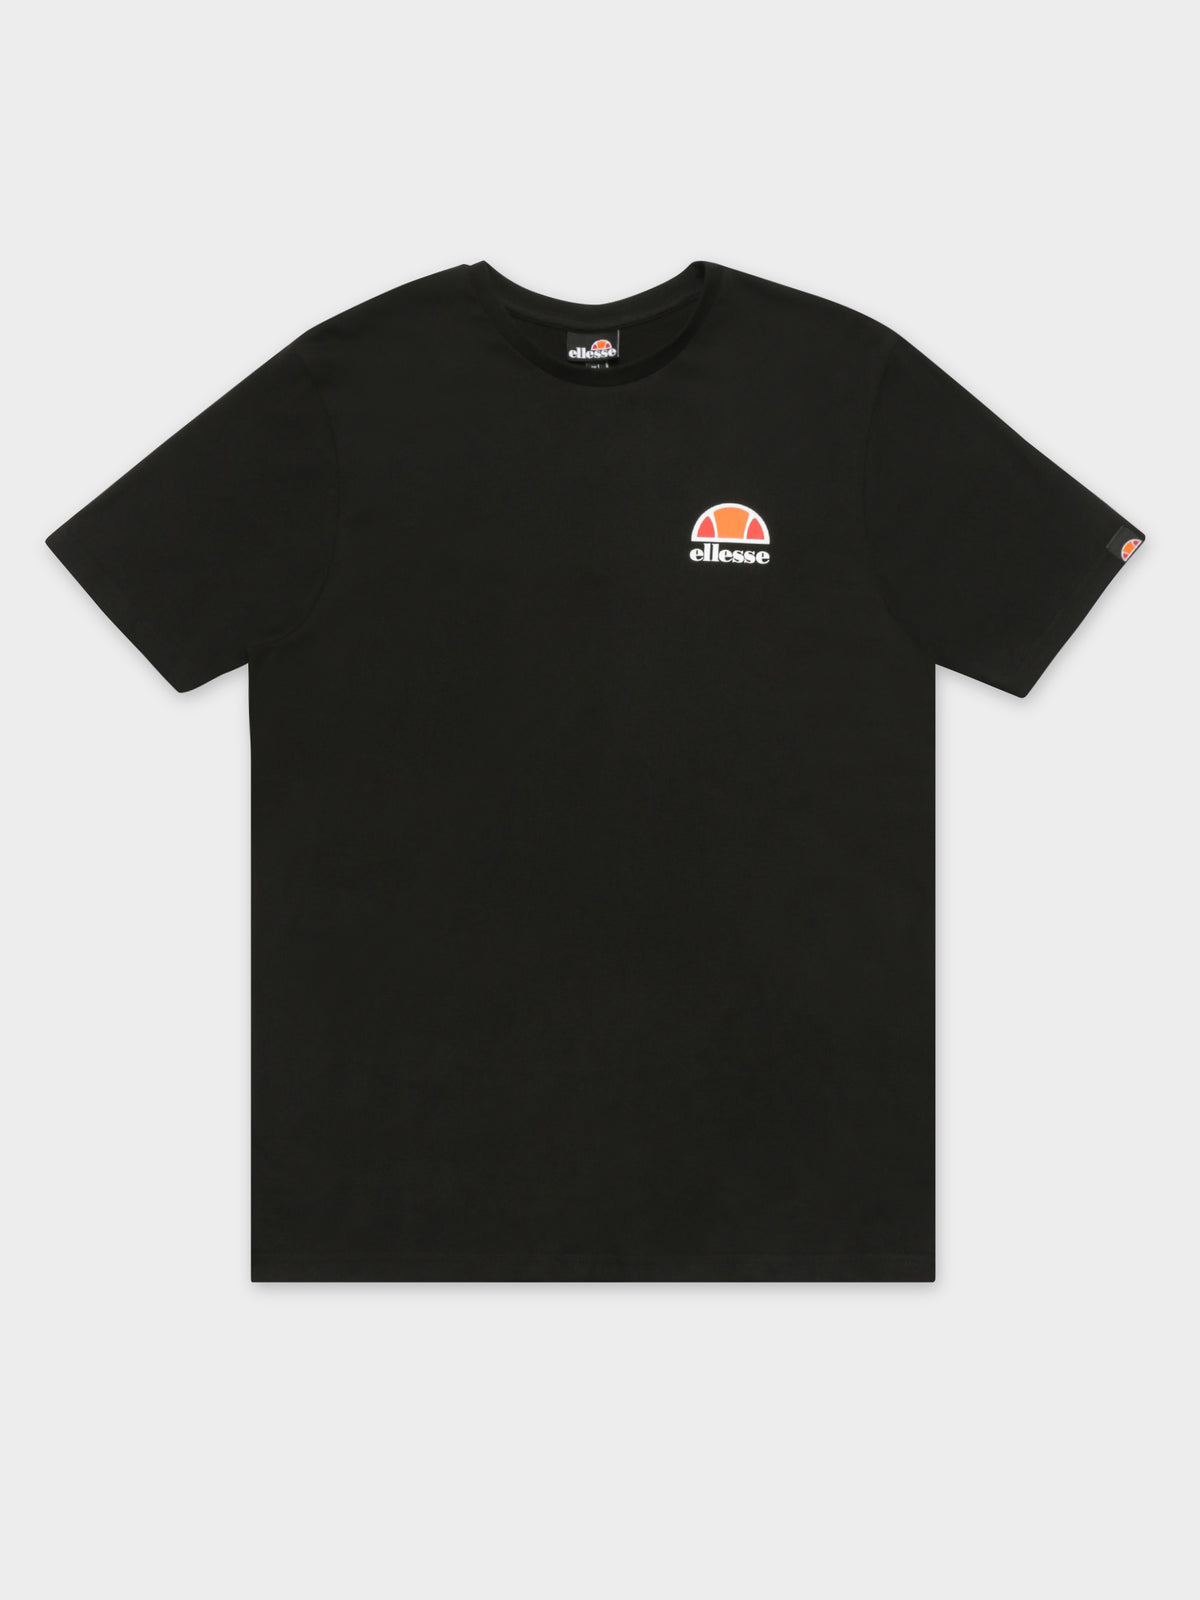 Canaletto T-Shirt in Anthracite Black